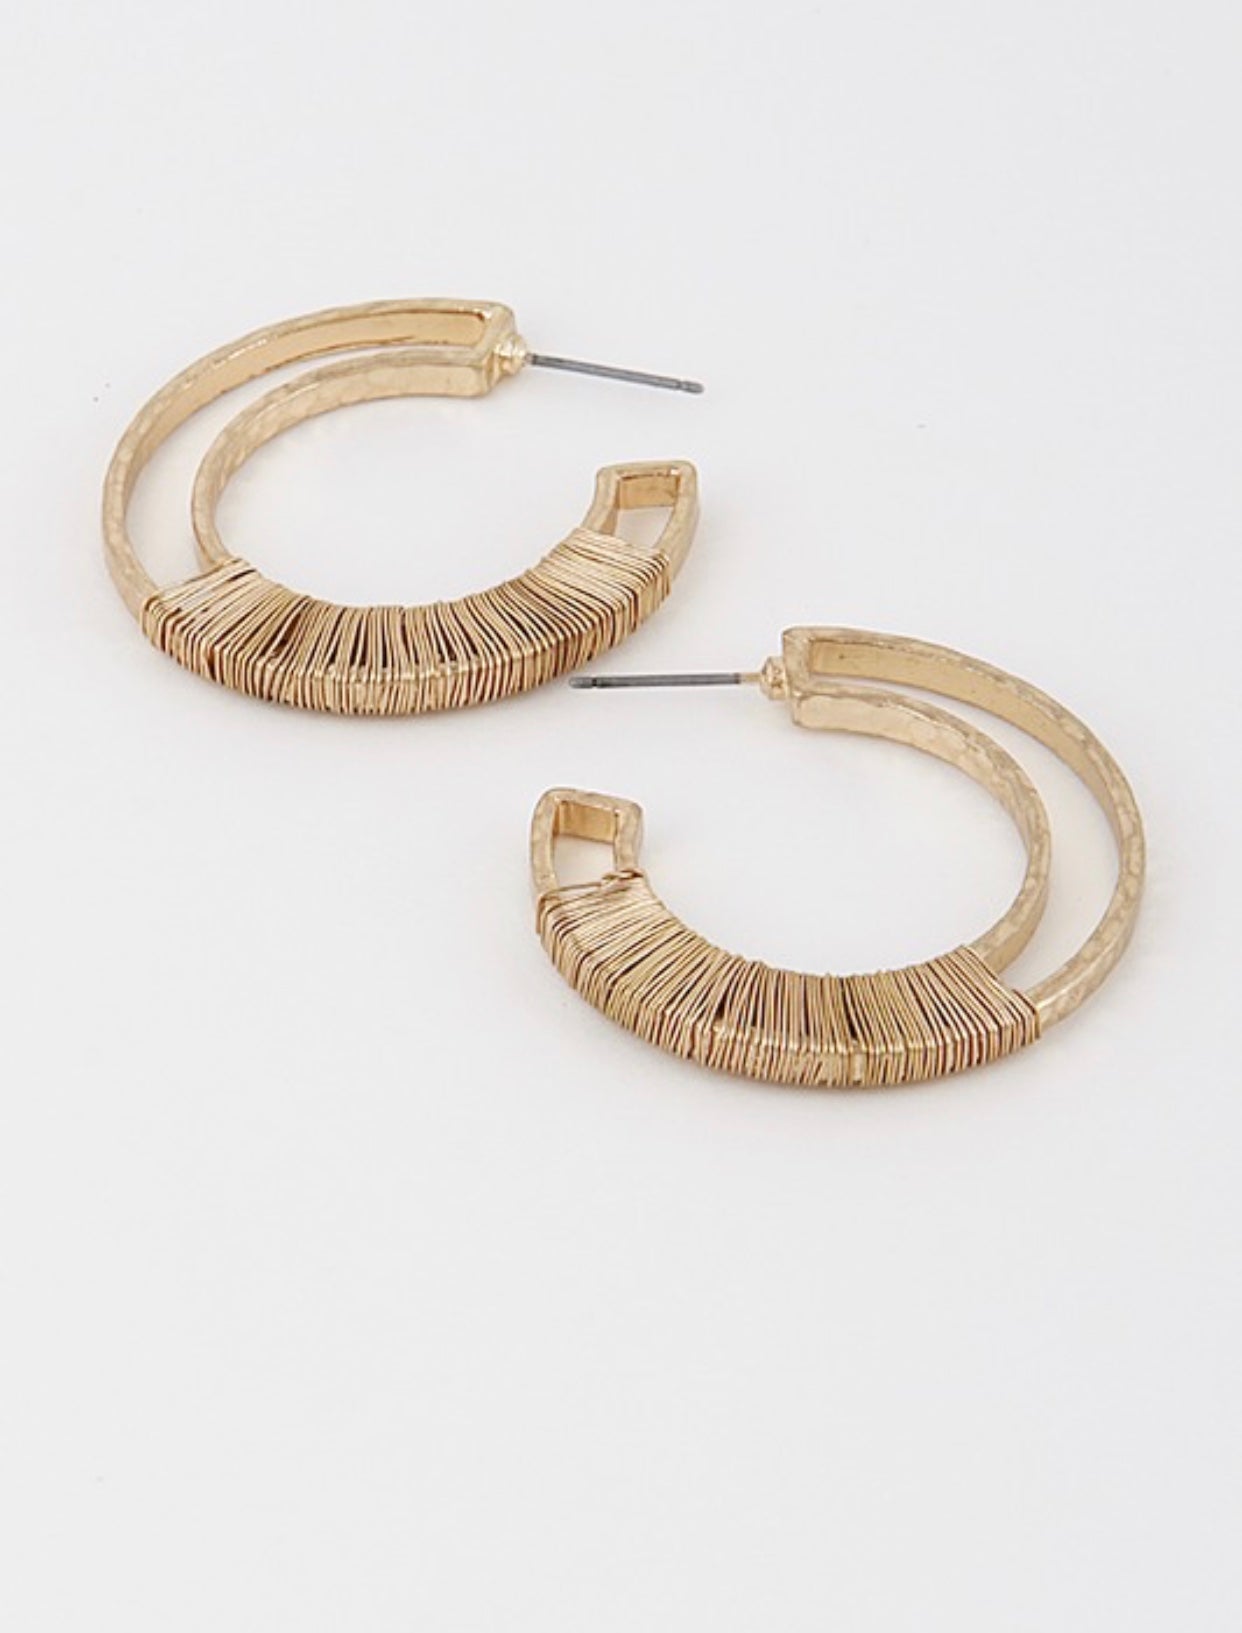 off the wire gold earrings